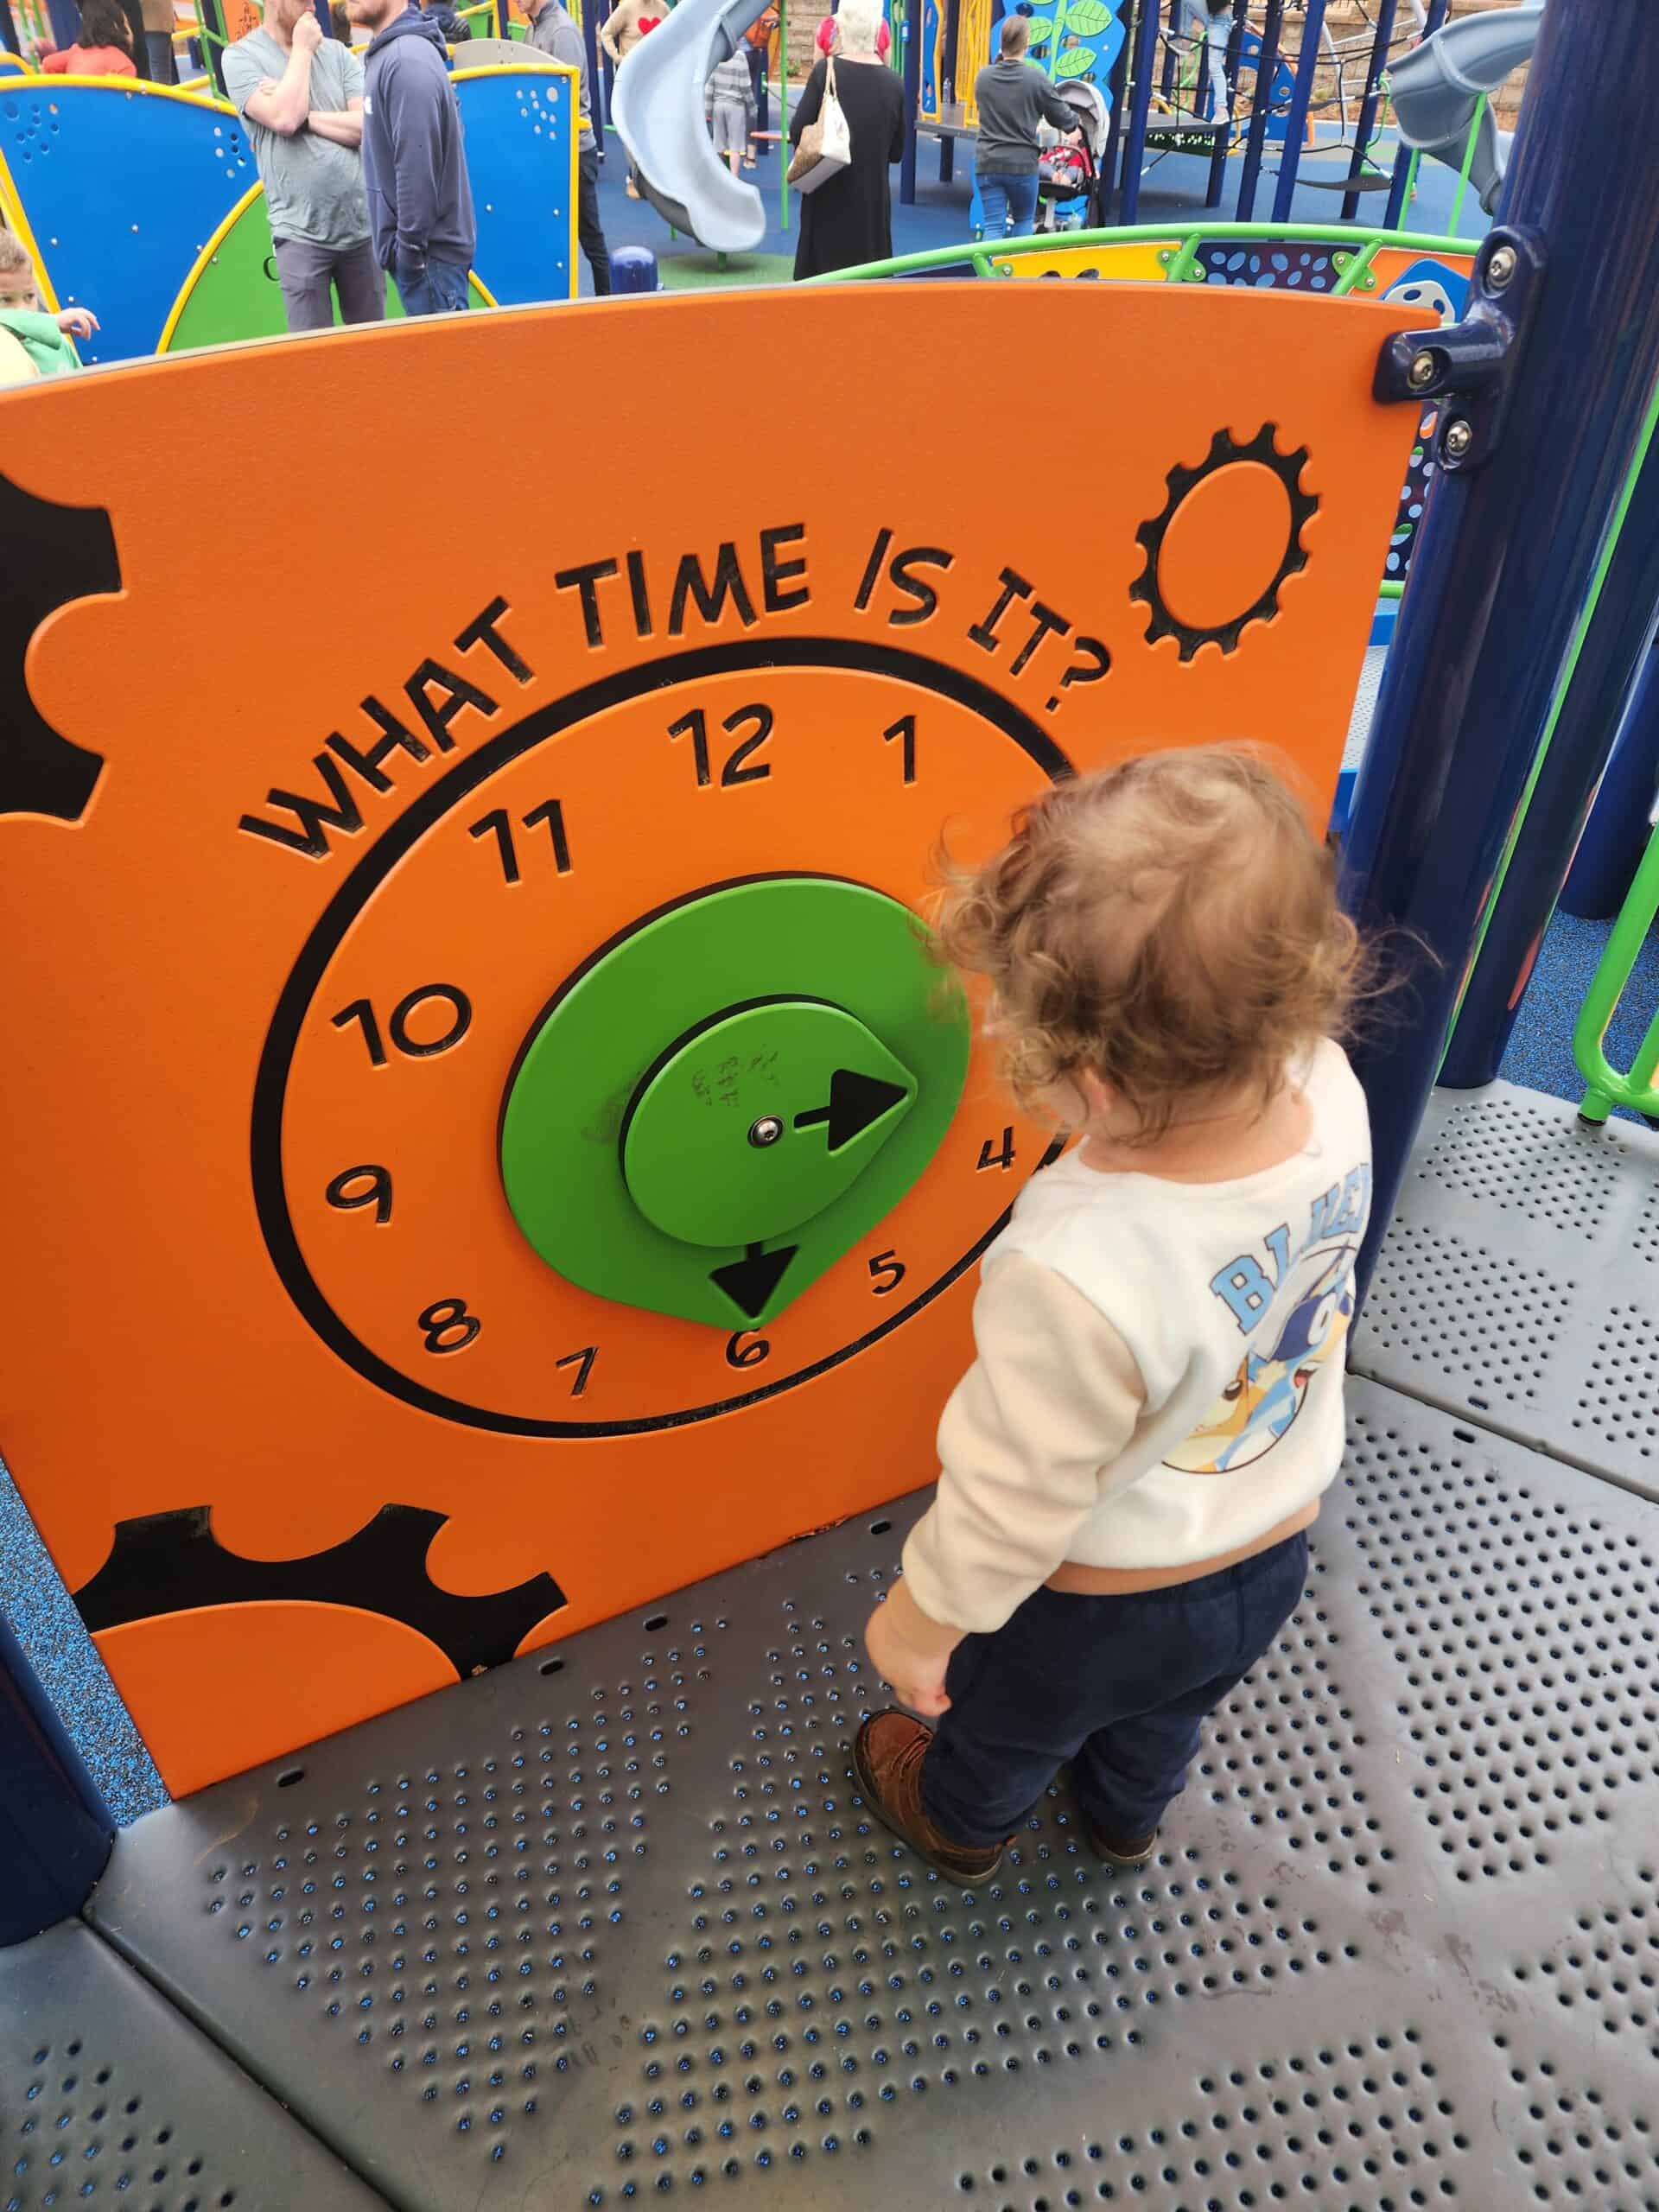 A curious toddler at Holding Park playground in Wake Forest examines a colorful learning panel with a large 'What Time Is It?' clock in shades of orange and green - an example of what makes this a toddler-friendly playground in the Triangle area 